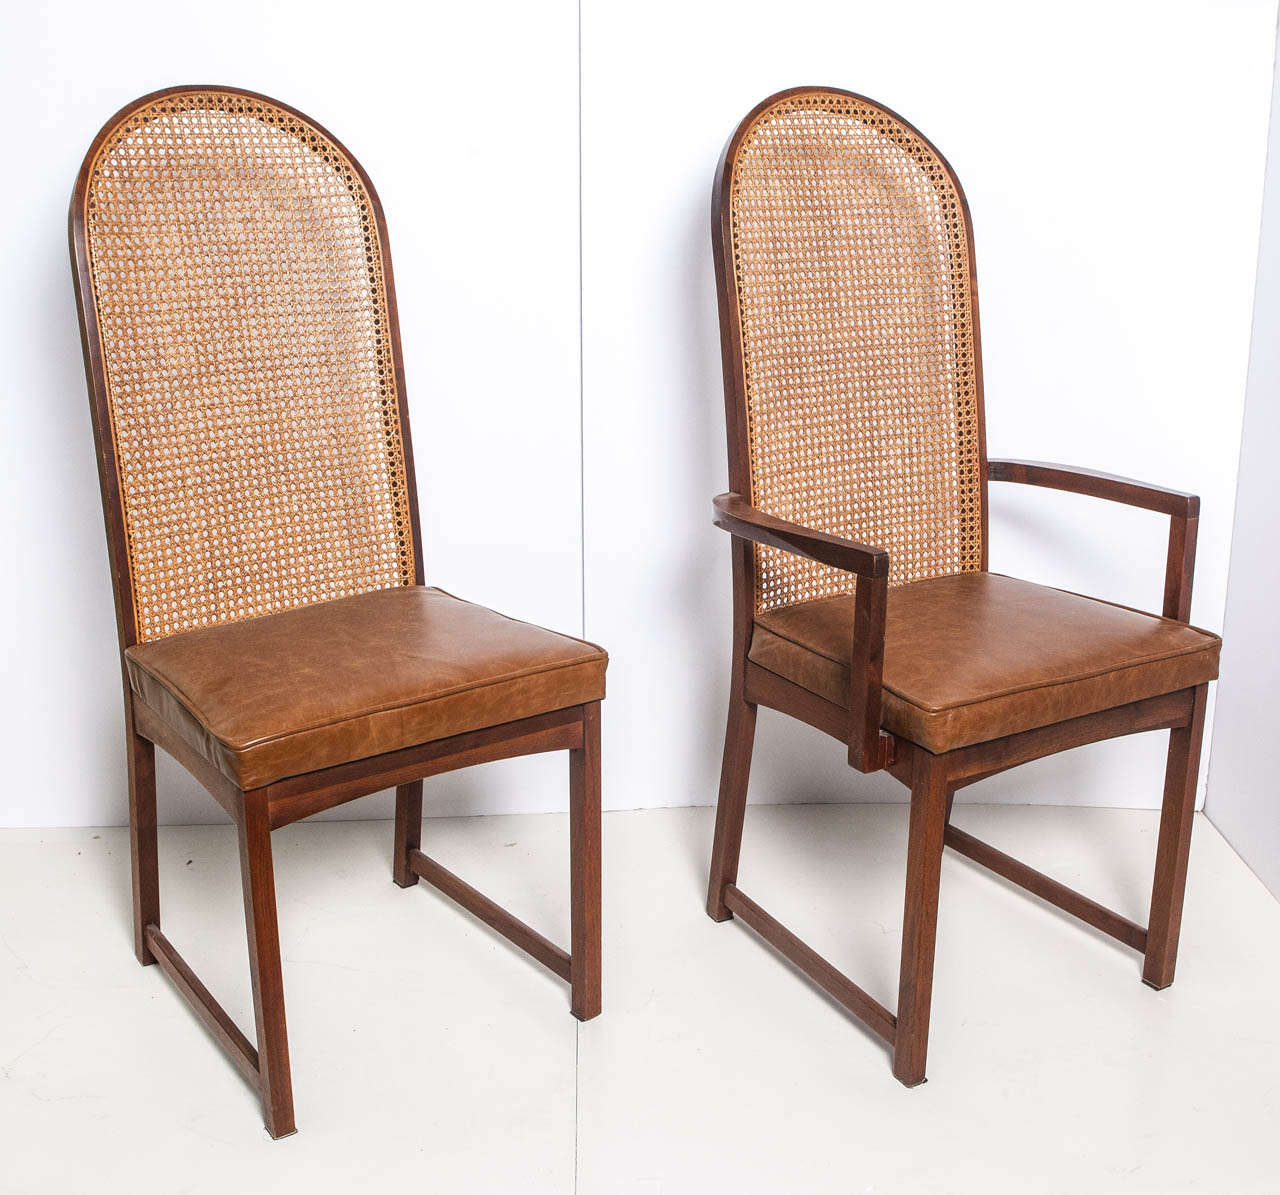 8 Milo Baughman dining chairs for Directional.